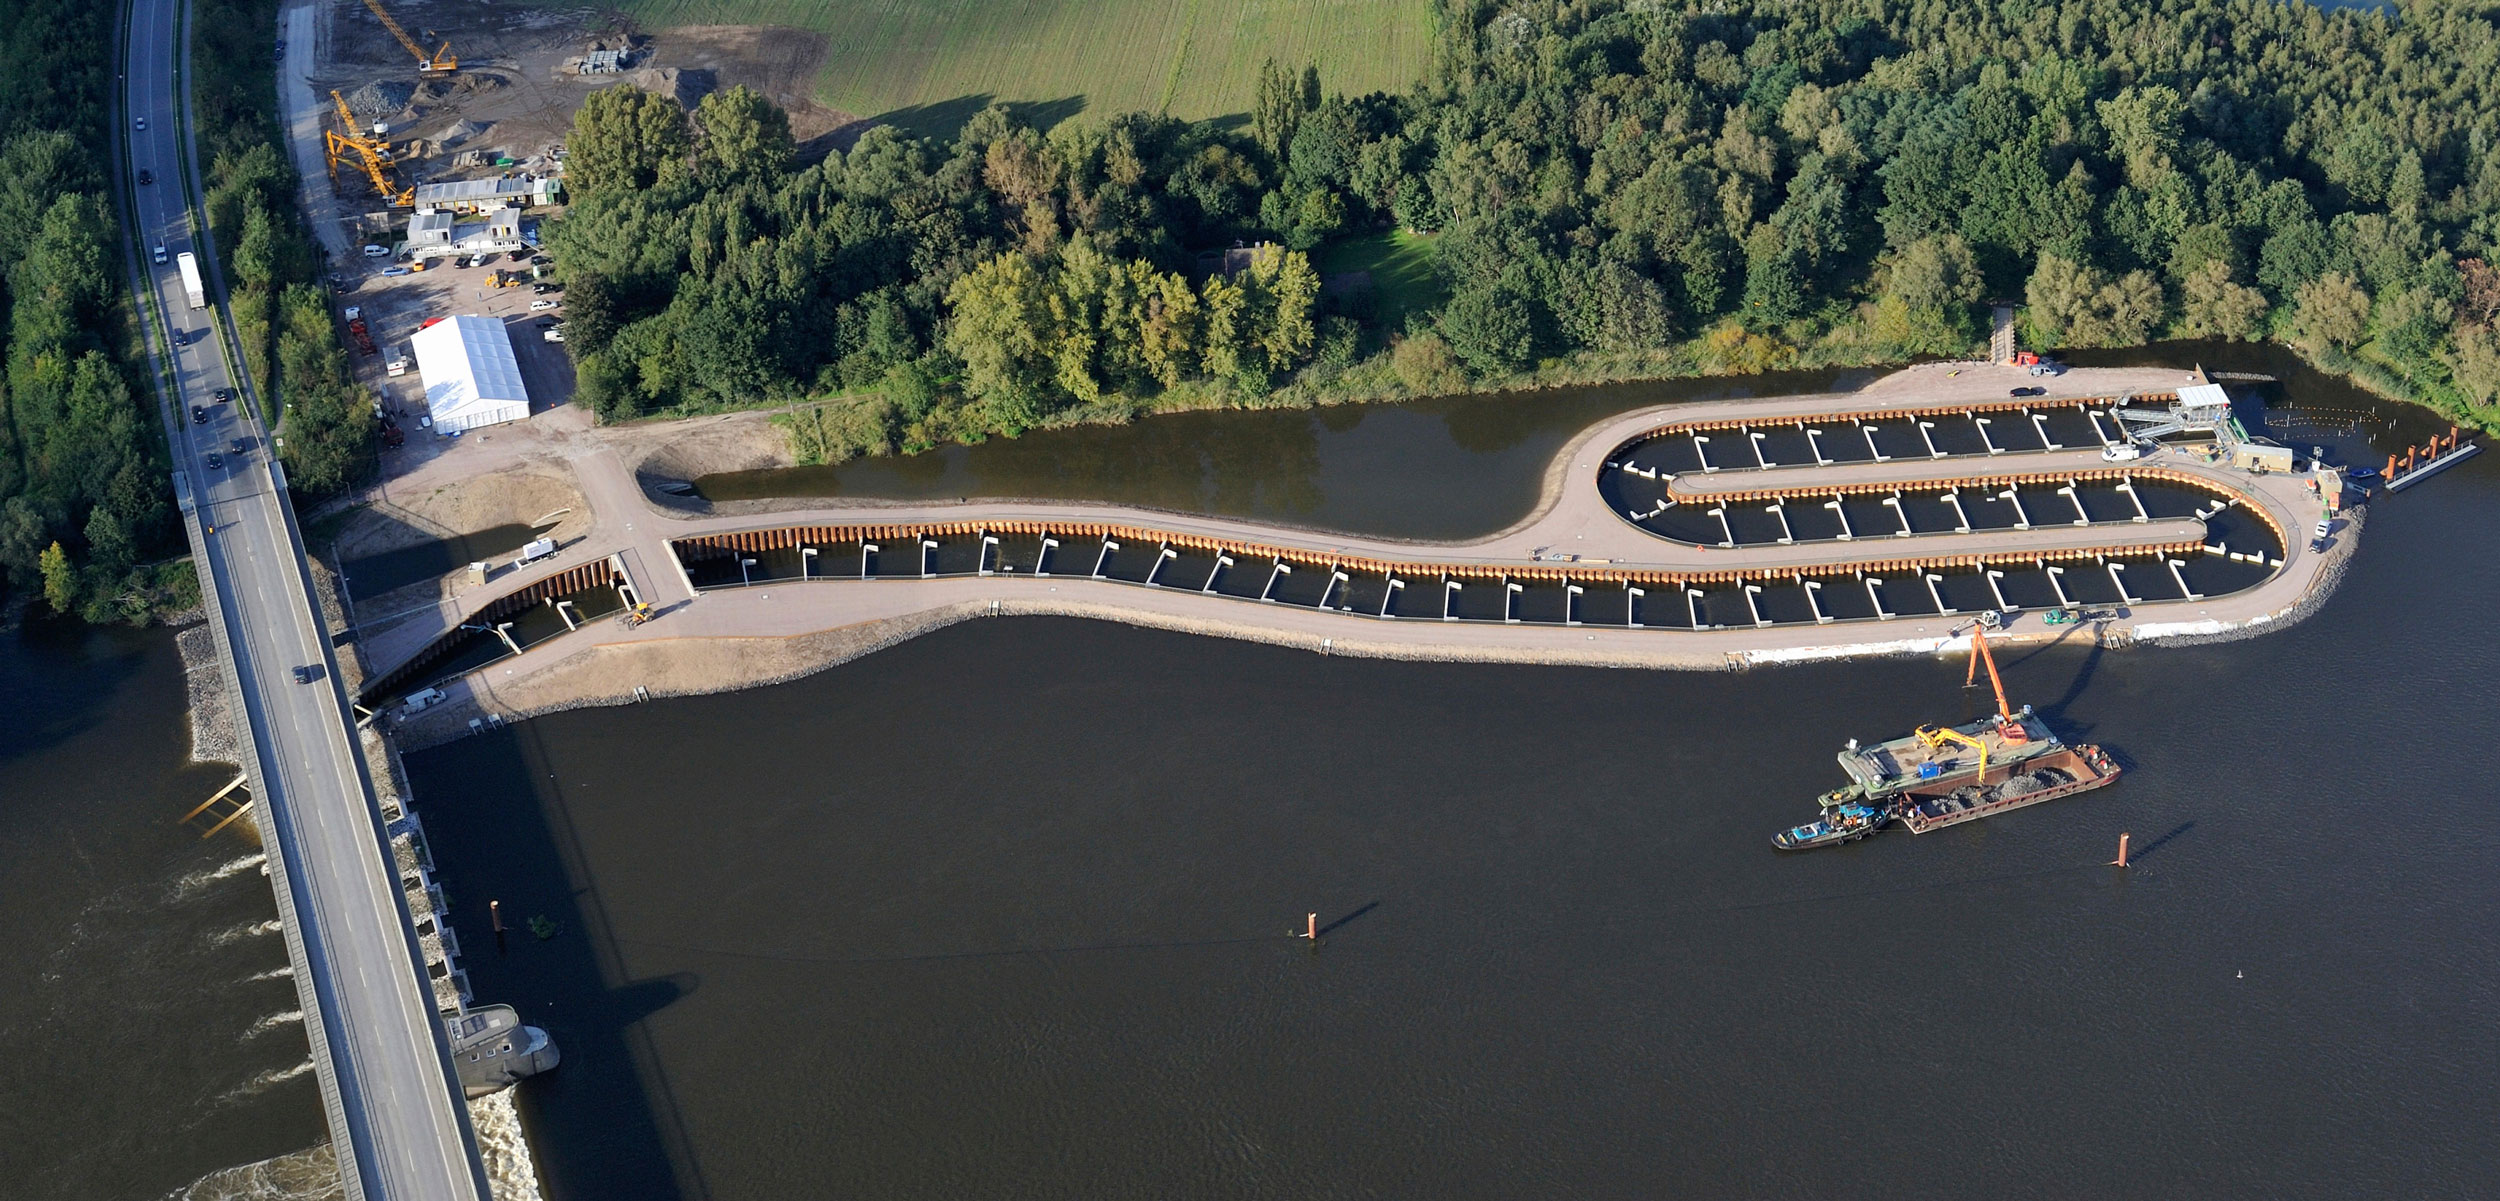 A fish ladder in the Elbe river, Germany